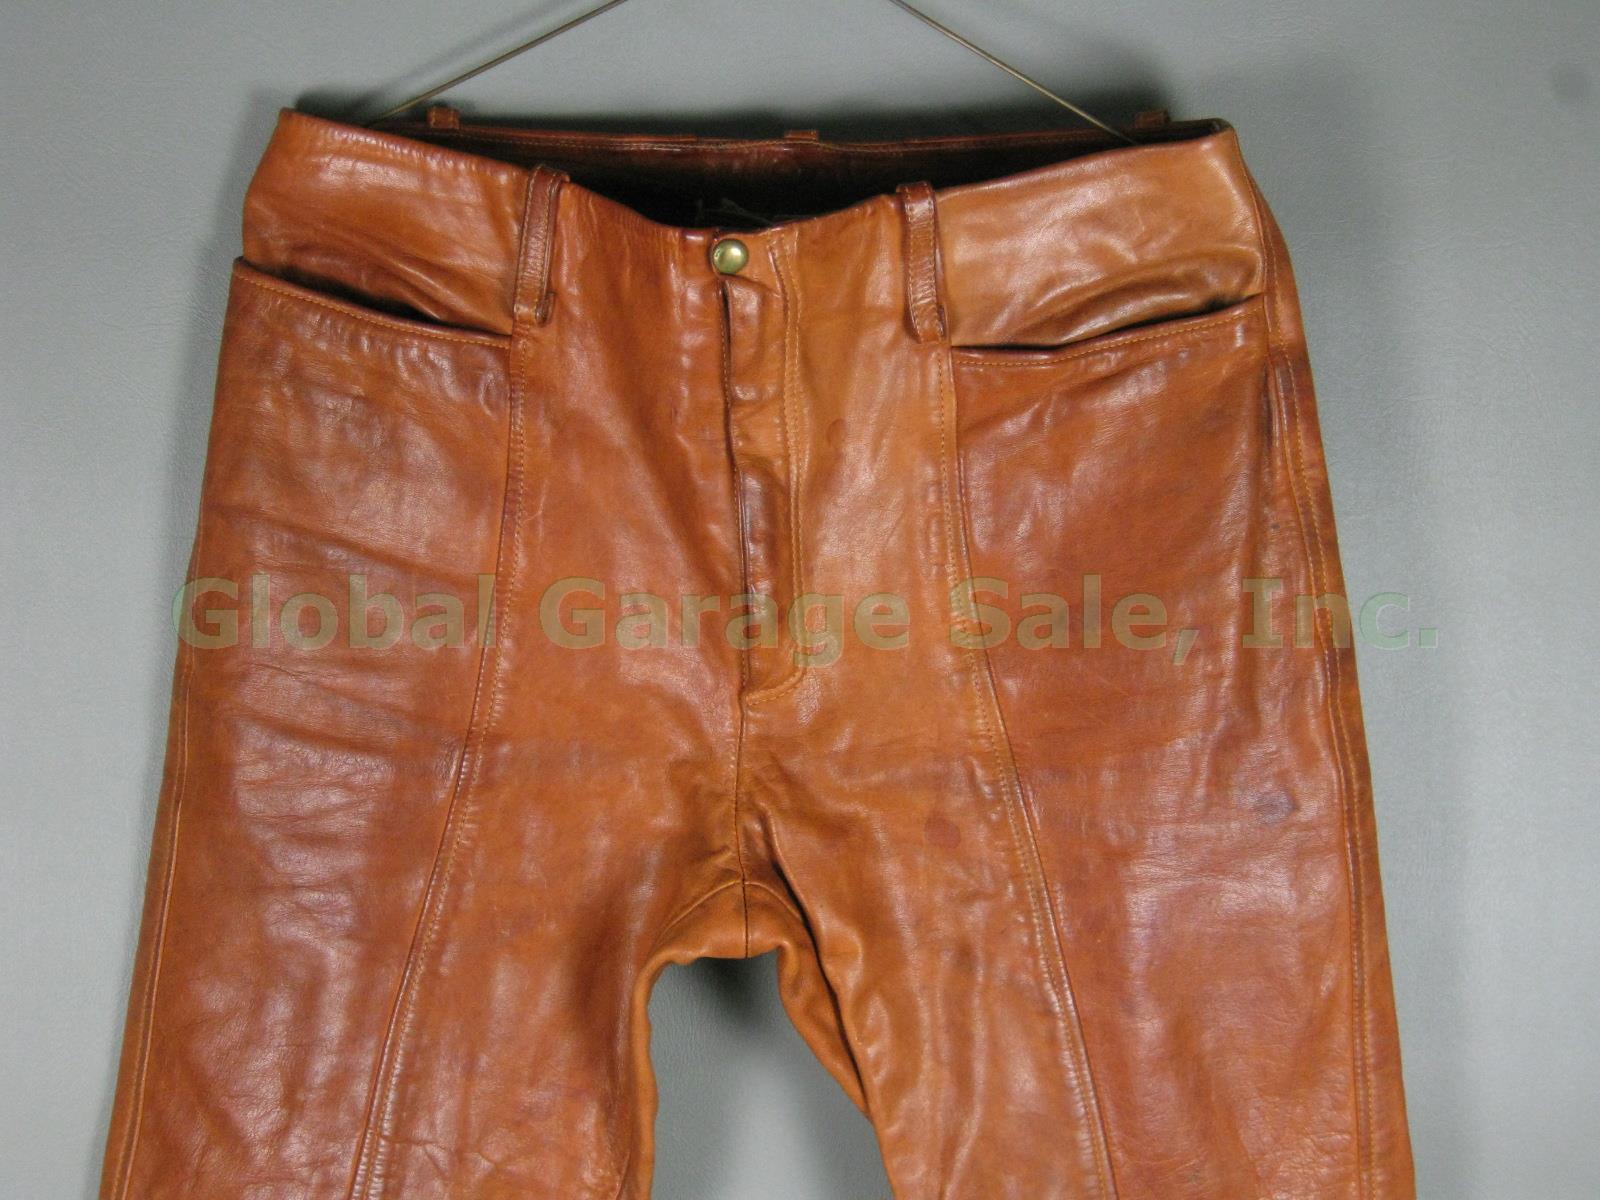 Vtg 1960s 1970s Vermont Made Leather Bell Bottom Hippie Rock Star Pants 31" x32" 1